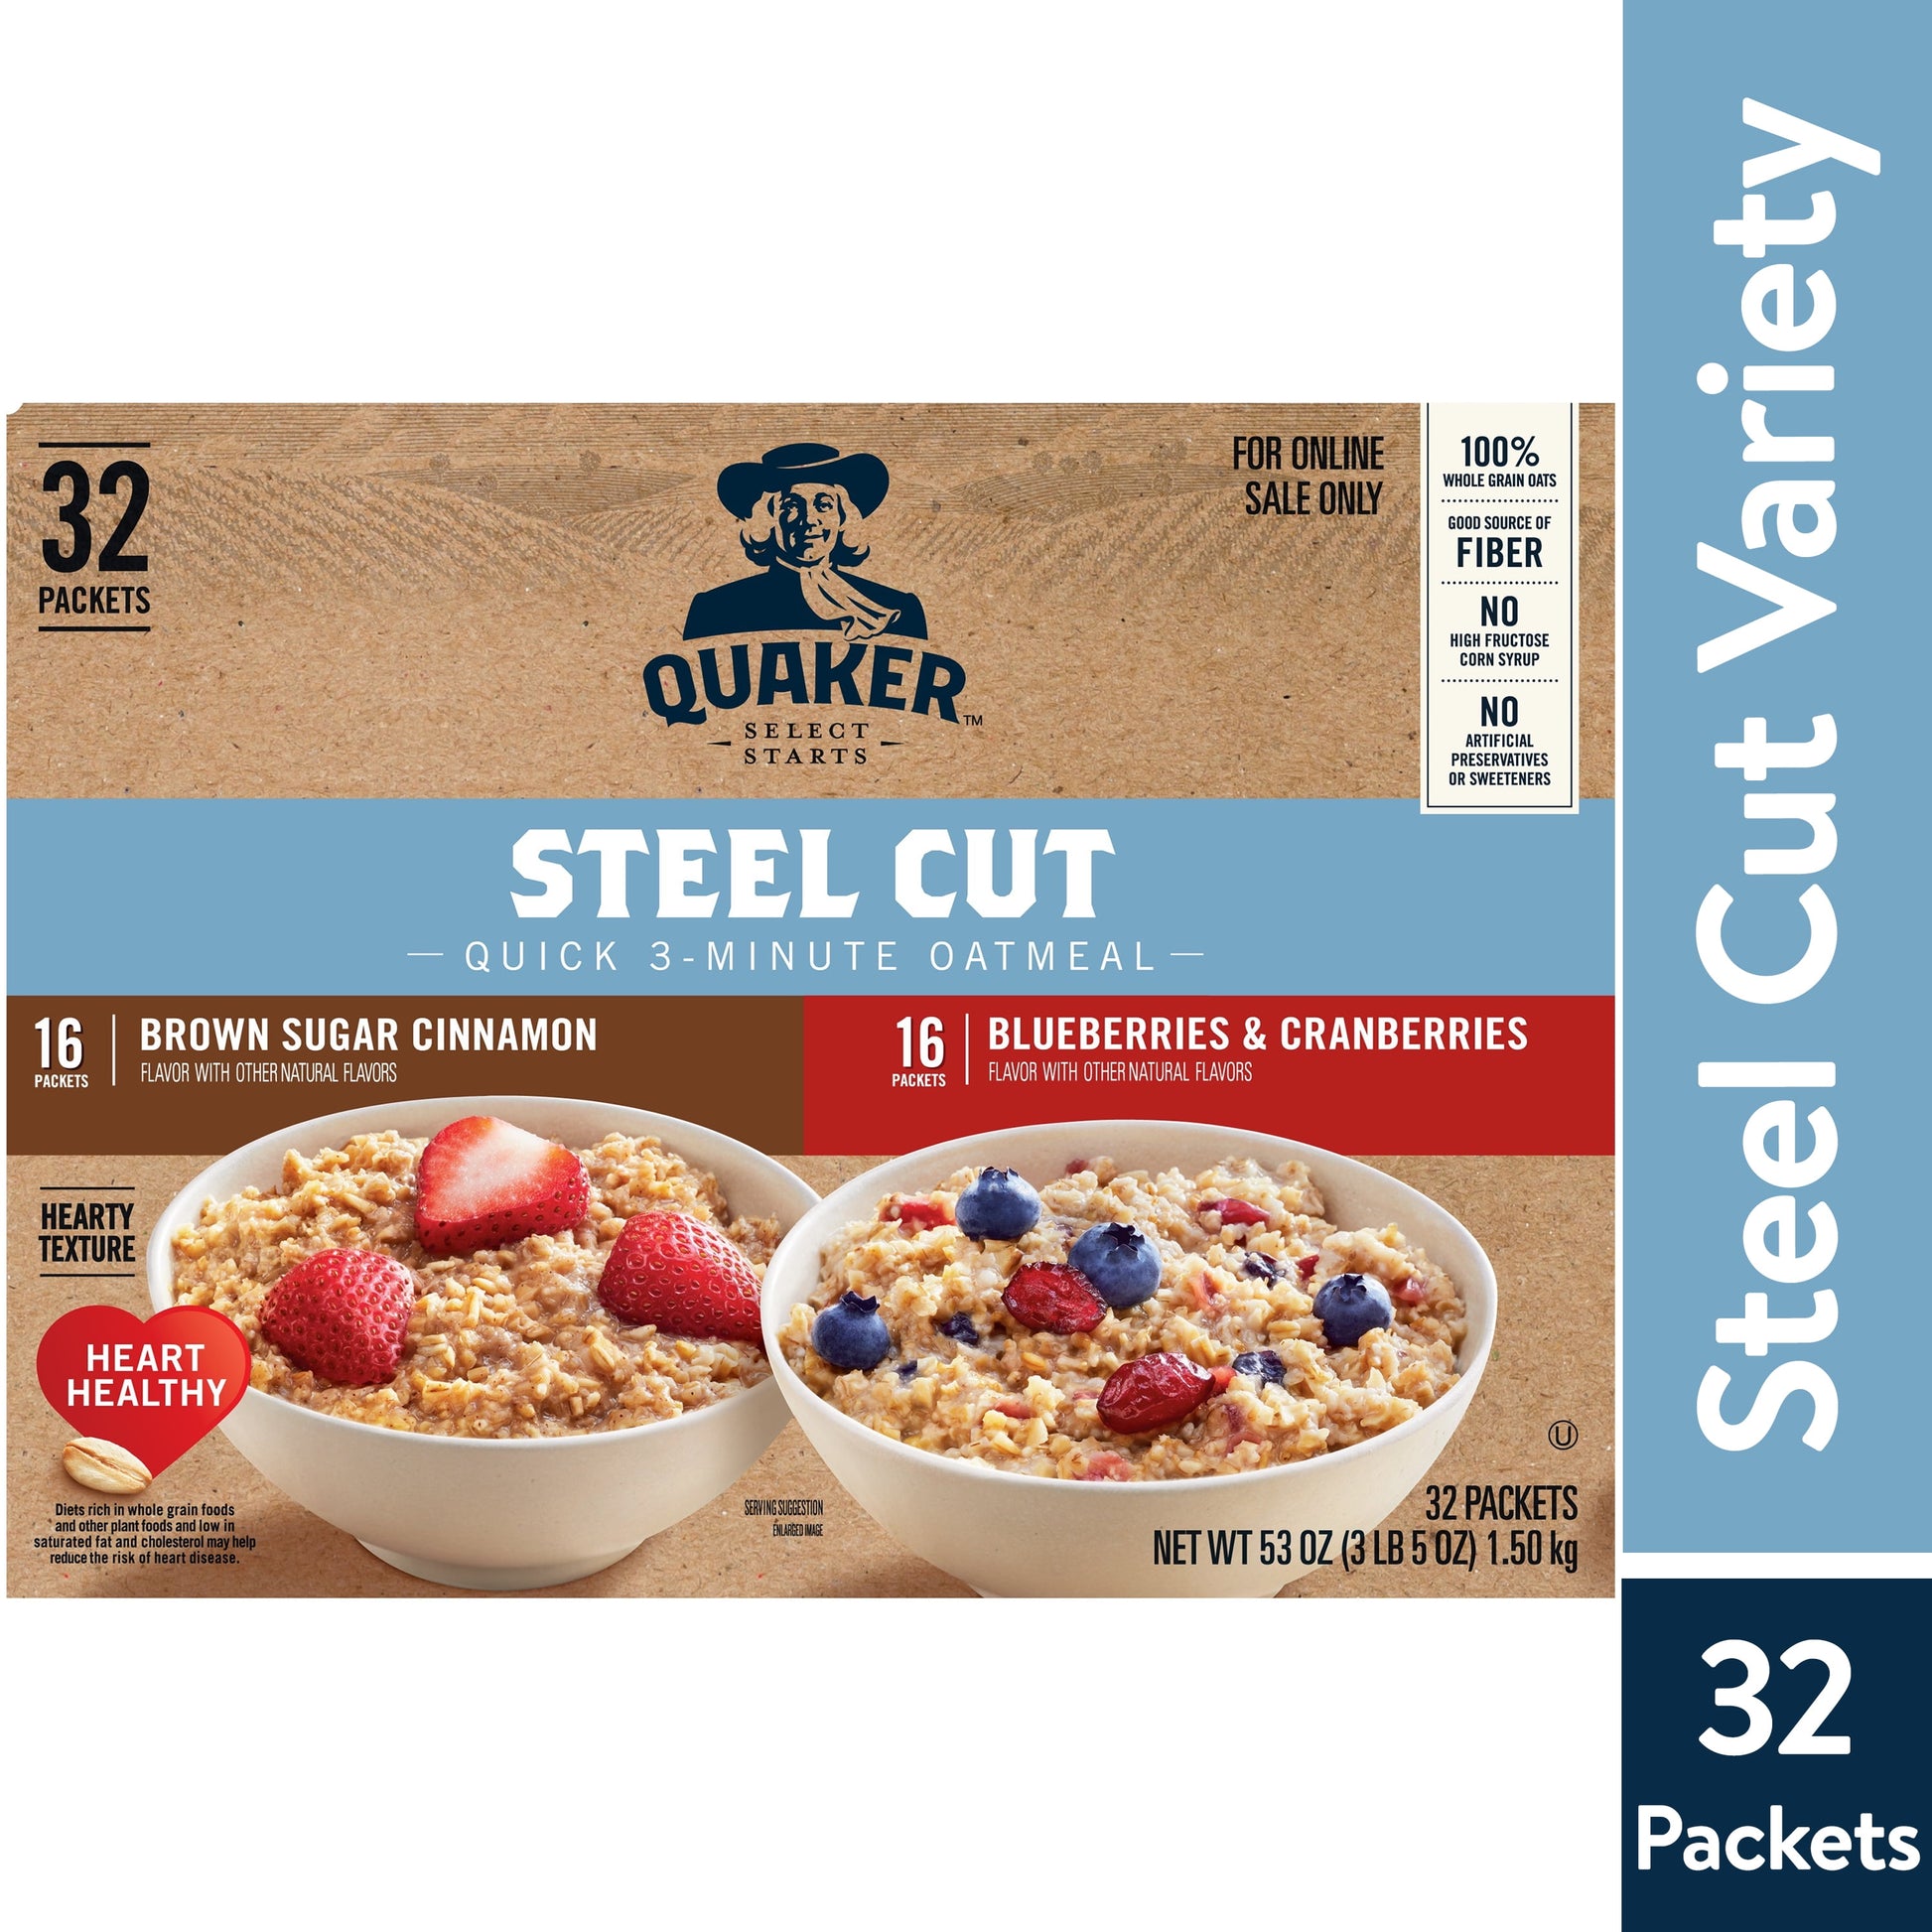 , Steel Cut Quick 3-Minute Oatmeal, Variety Pack, Stovetop Oatmeal, 32 Packets